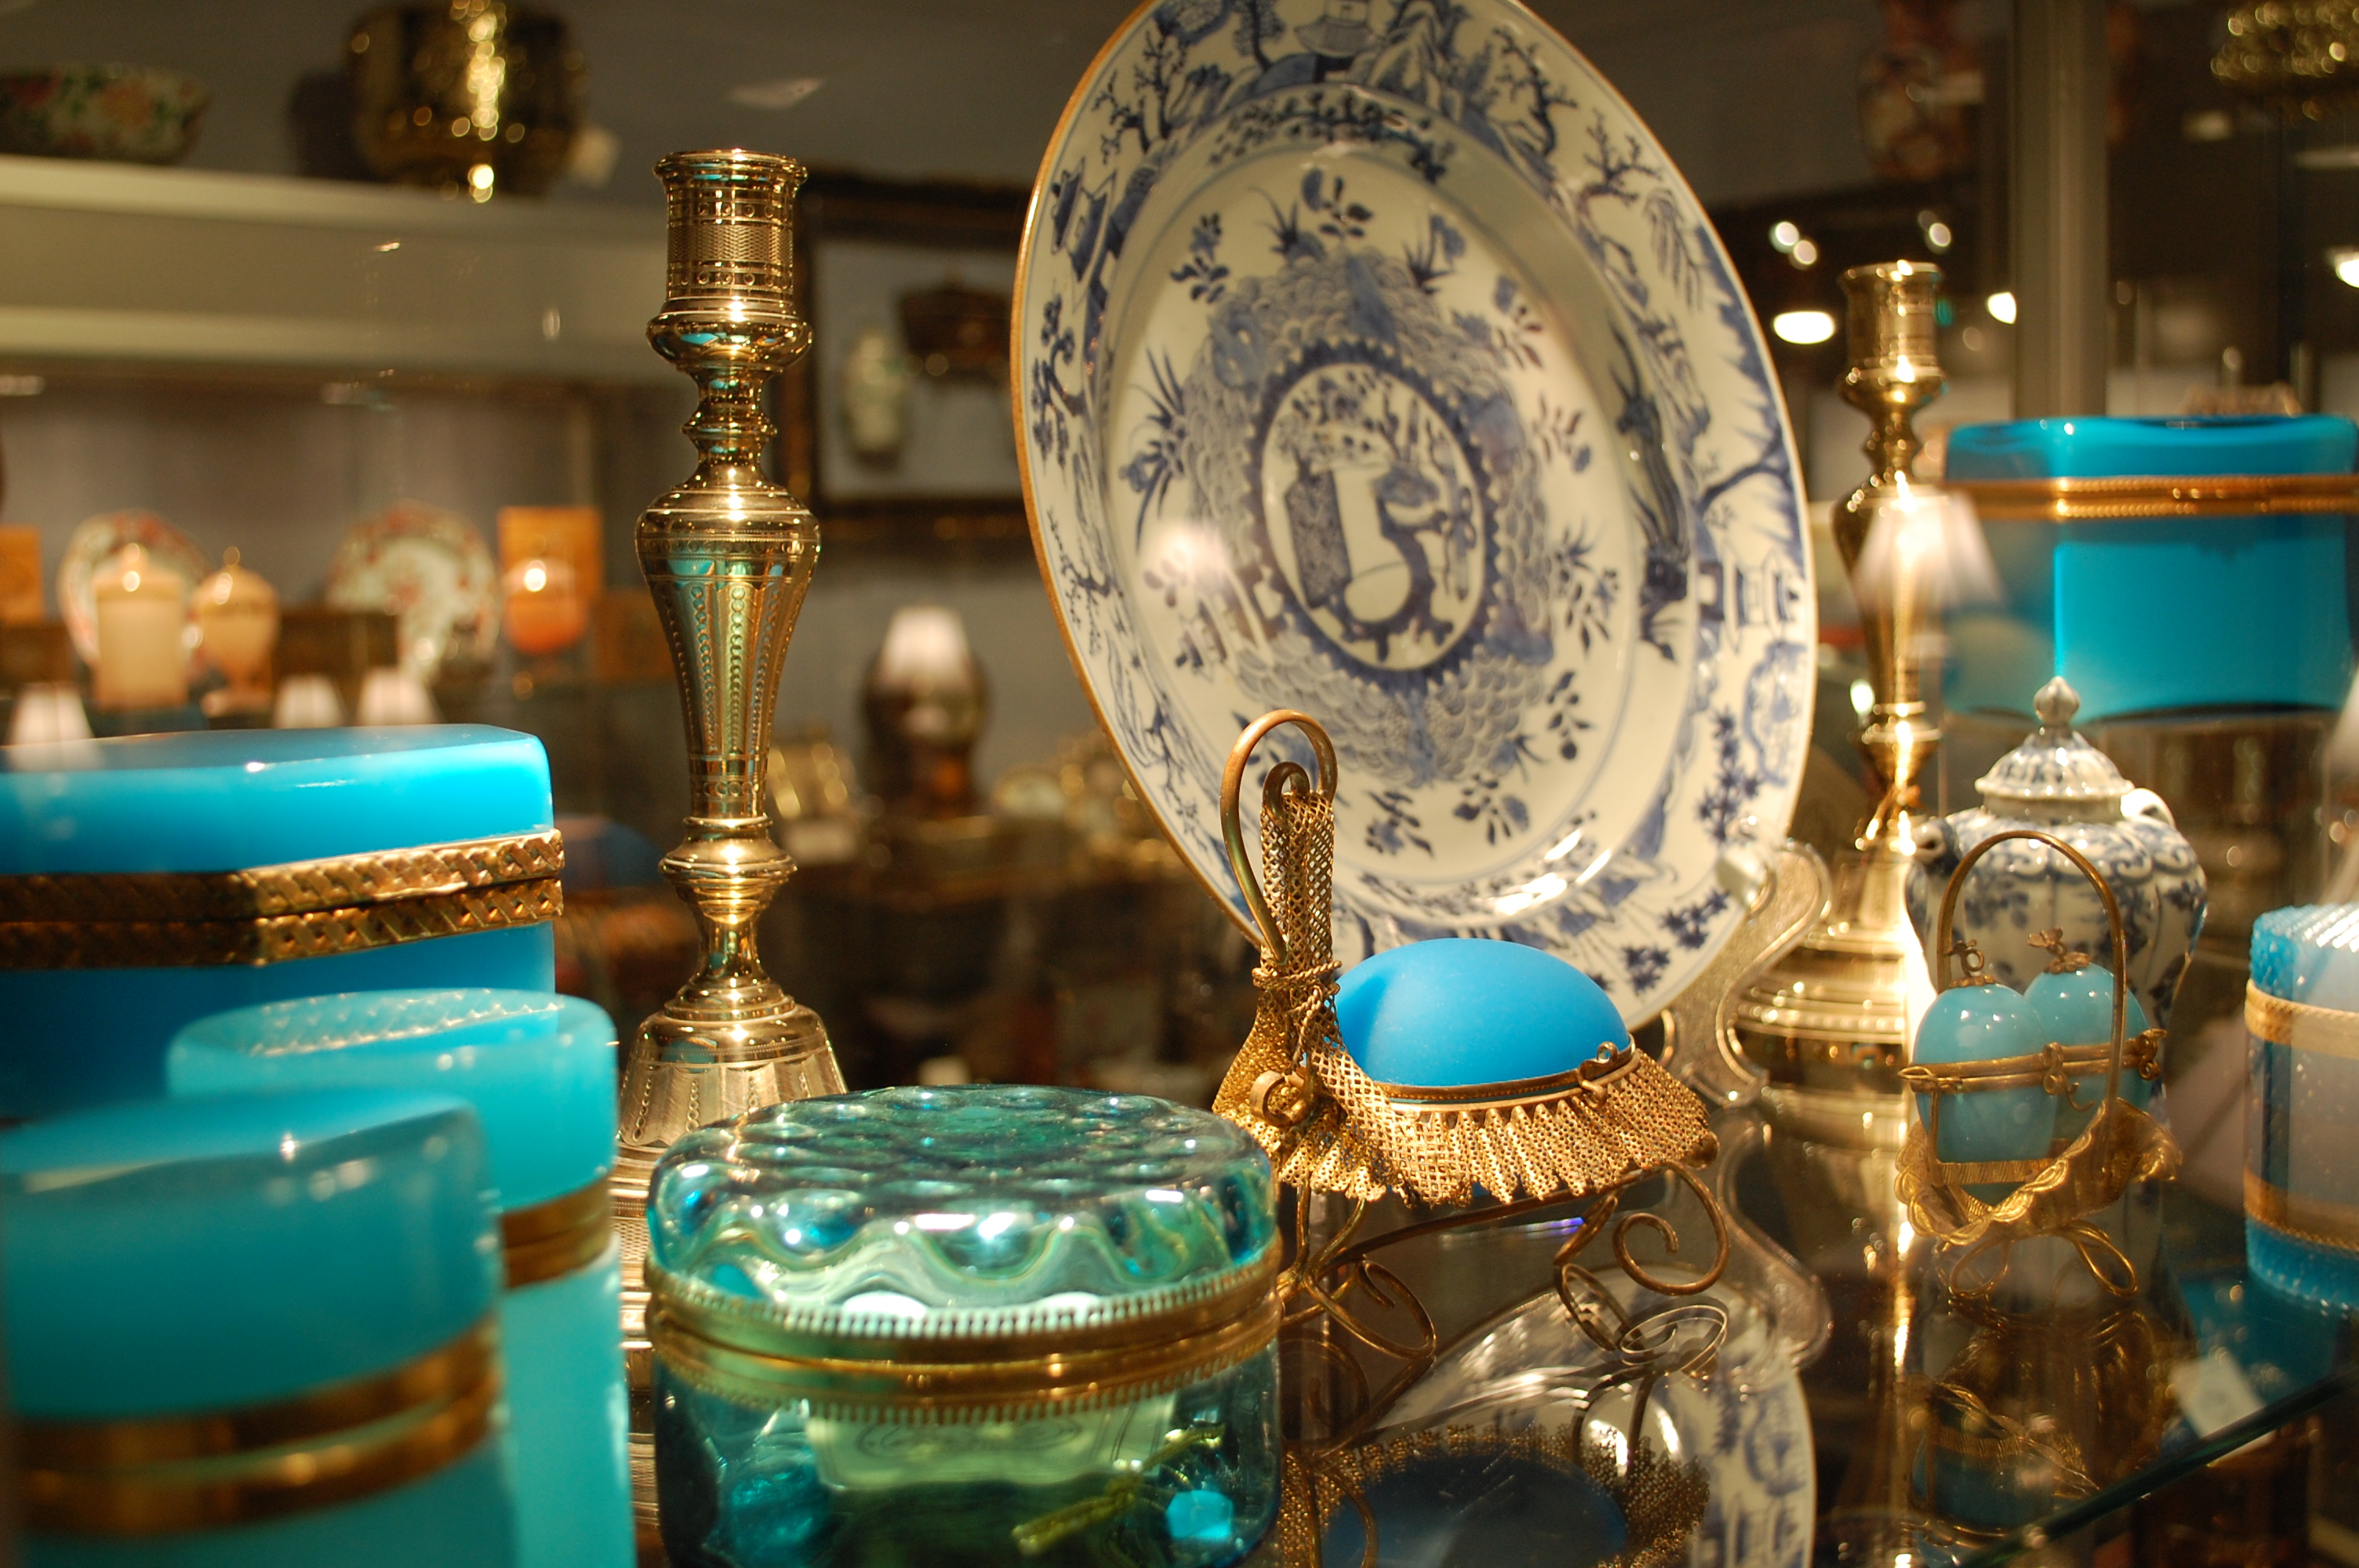 Charleston Antiques Show, March 20-22, 2015